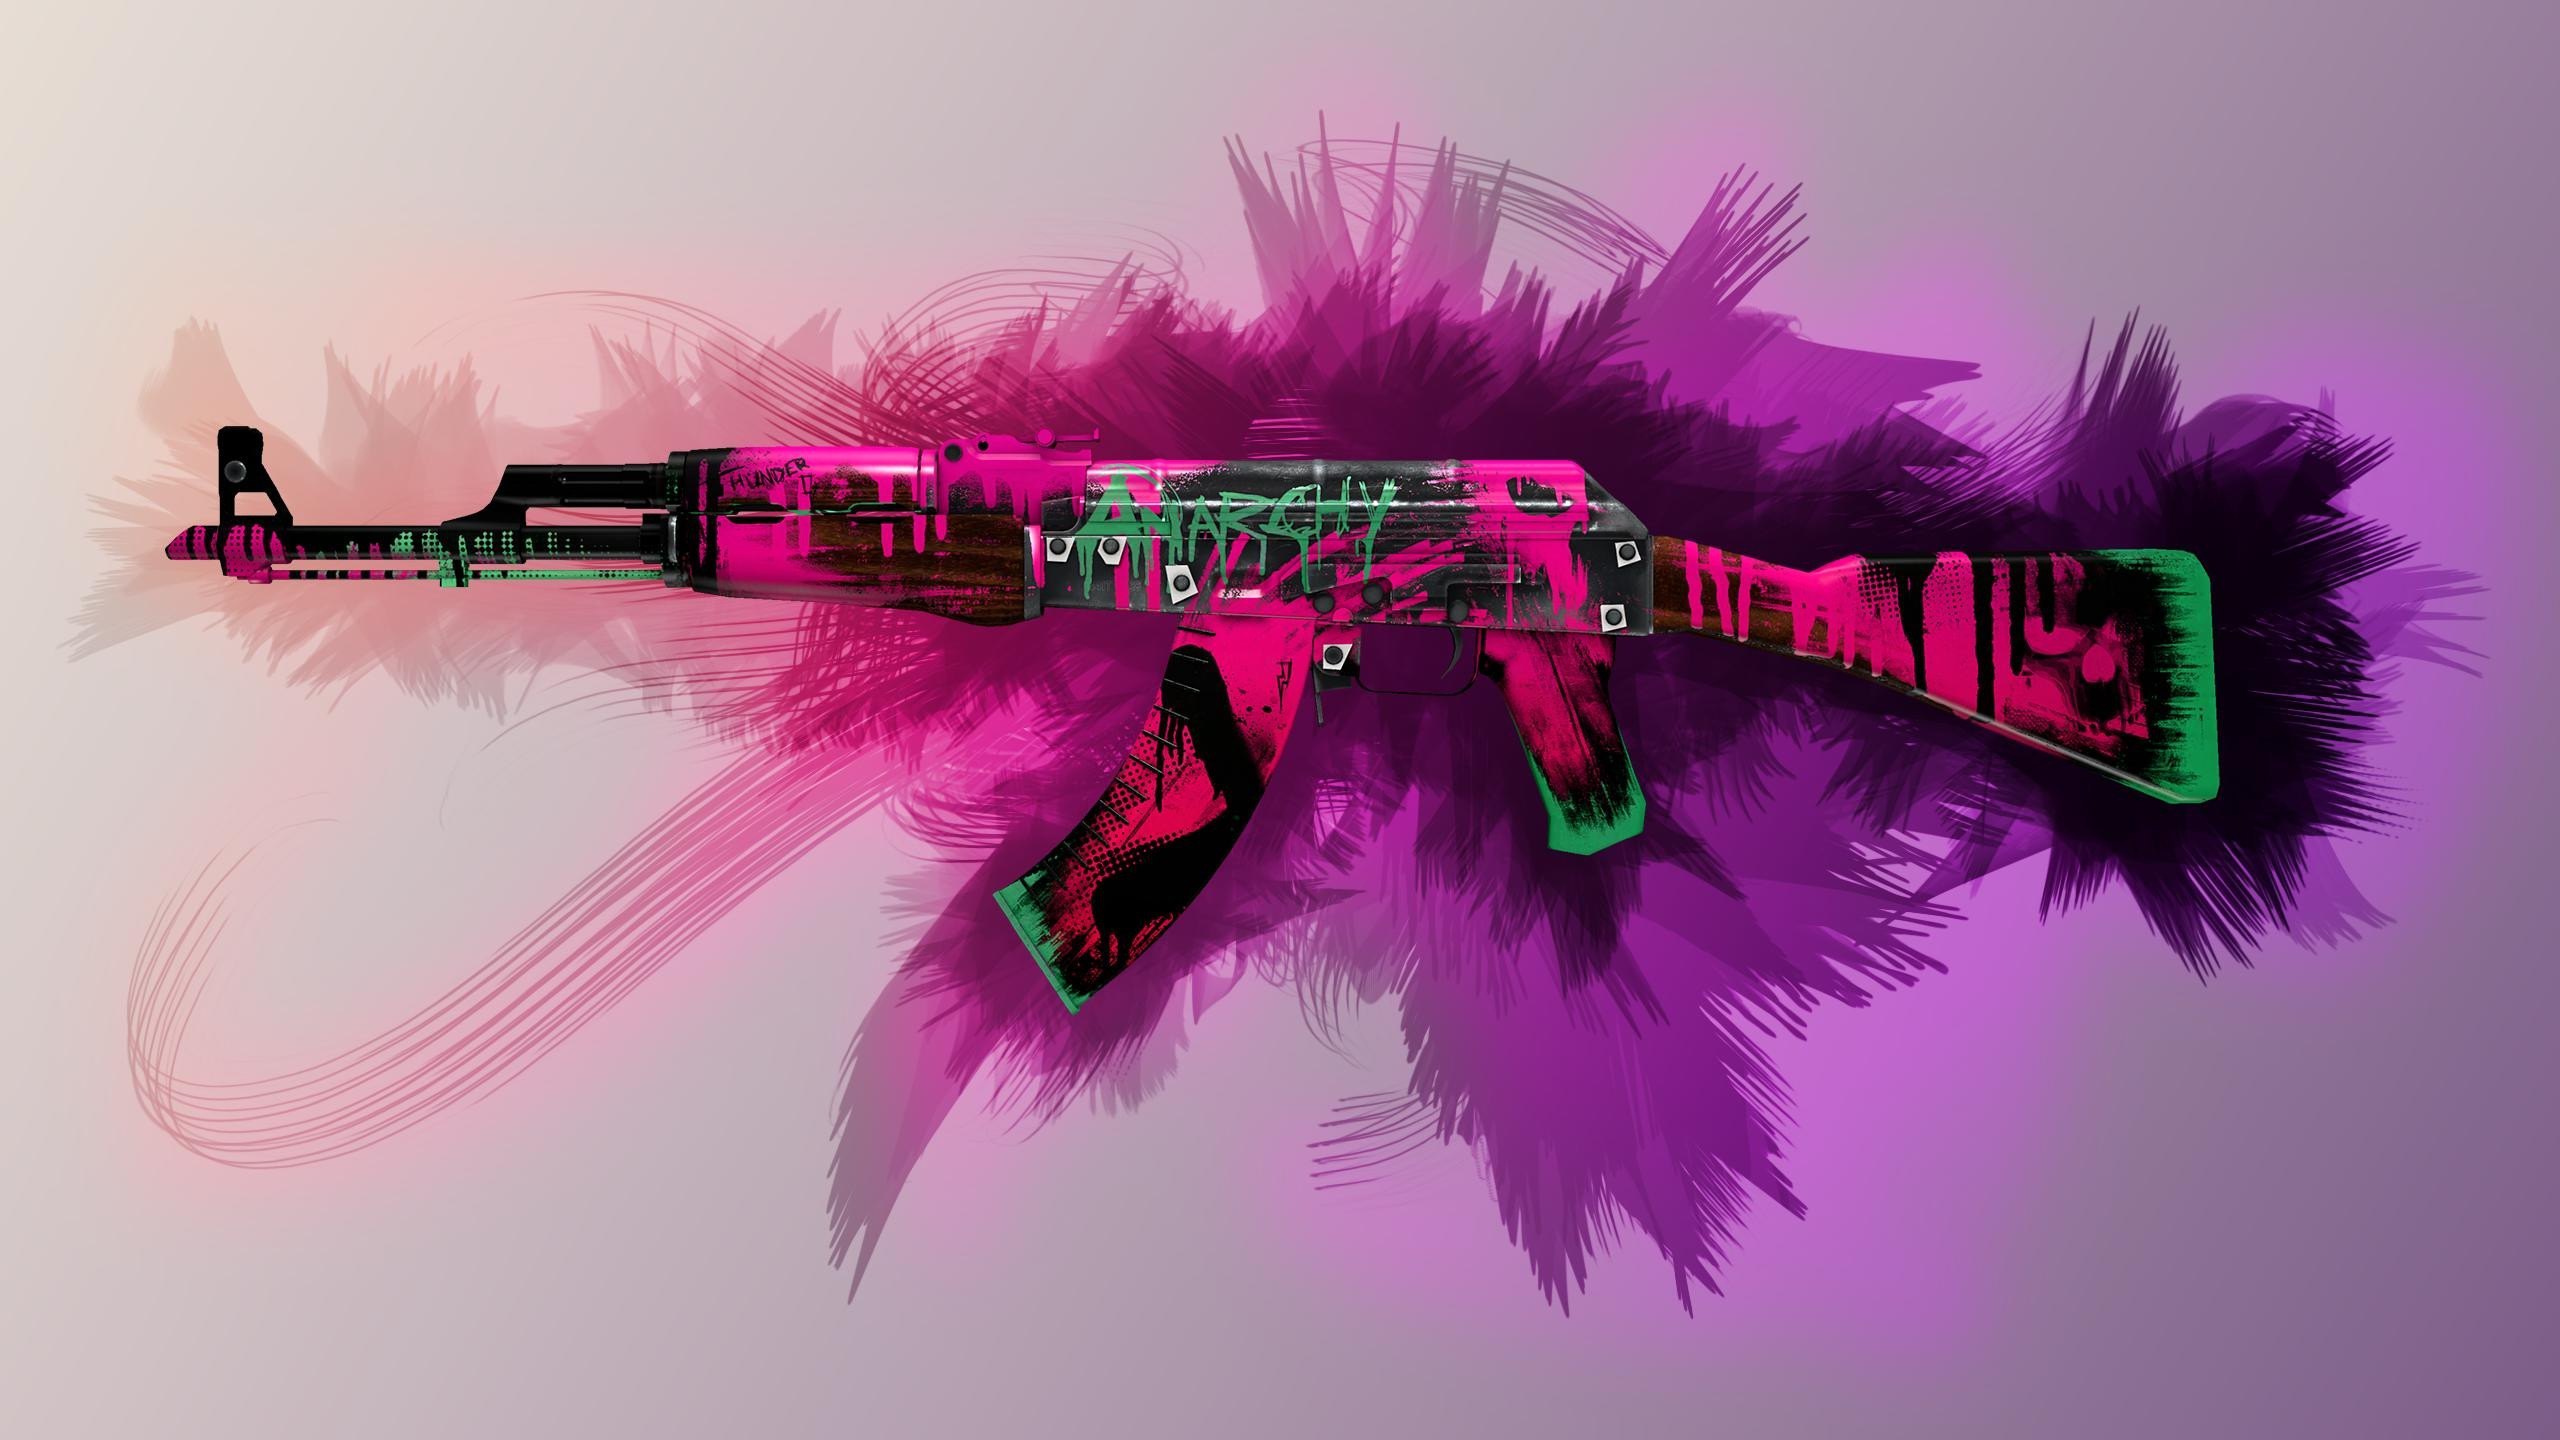 download the last version for apple Woodland cs go skin